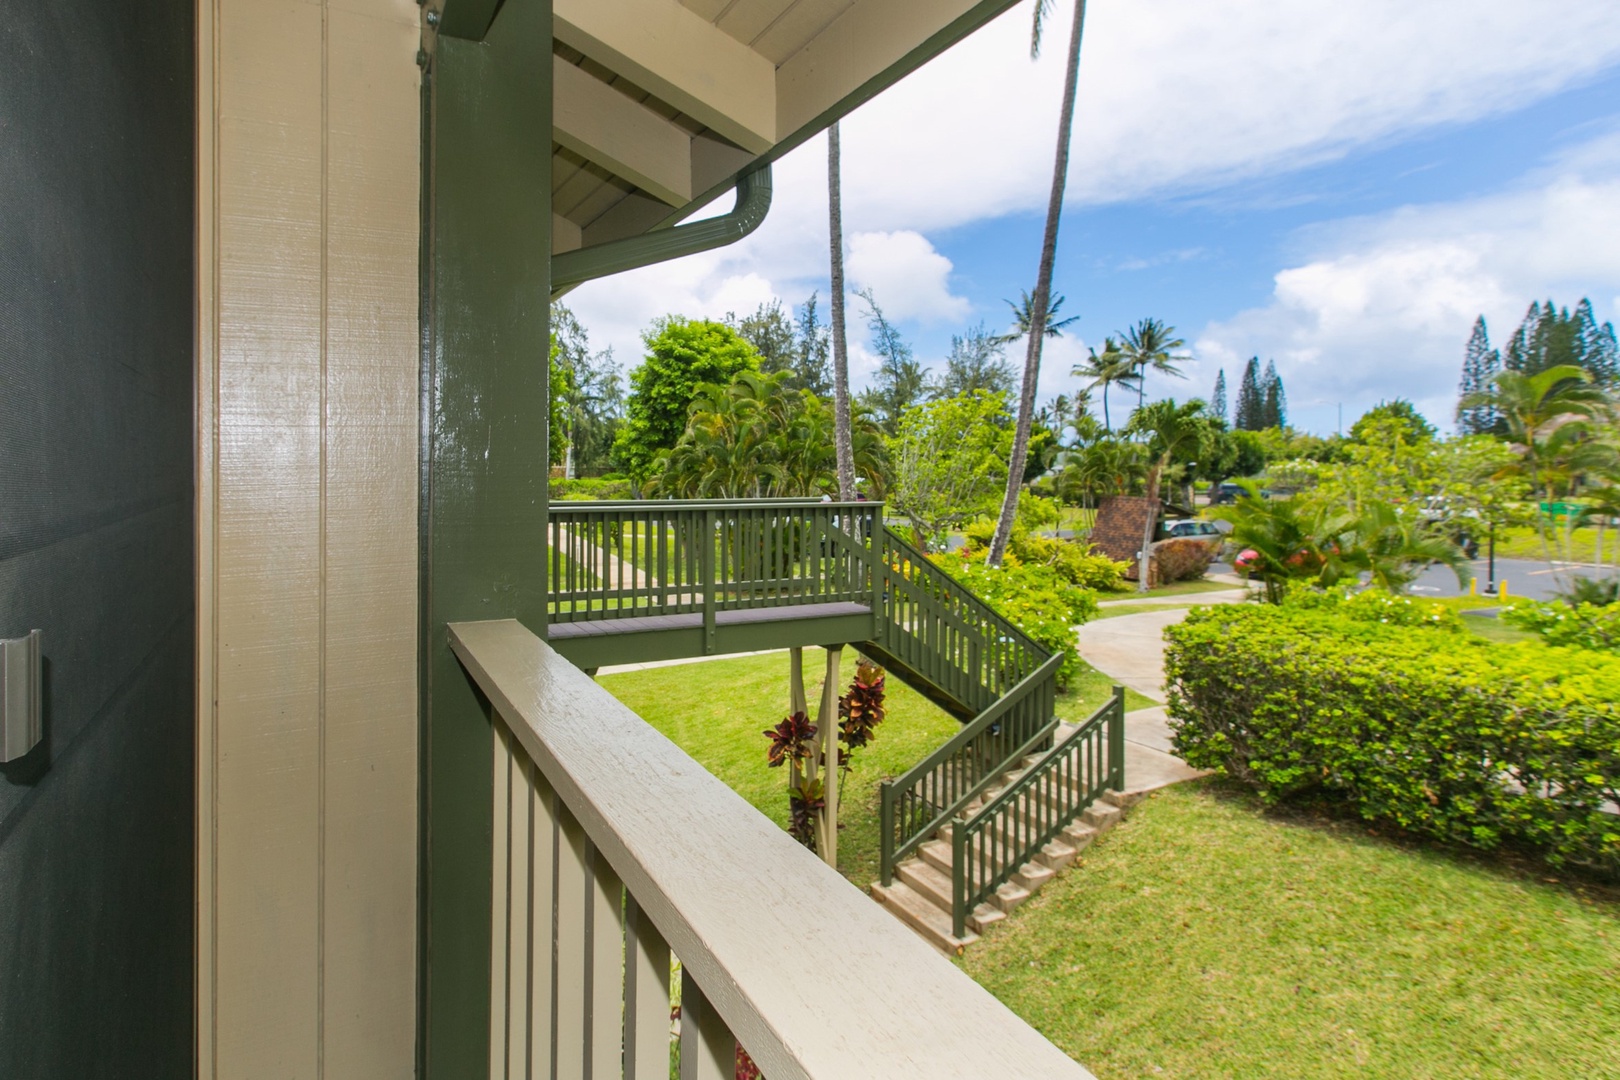 Kahuku Vacation Rentals, Ilima West Kuilima Estates #18 at Turtle Bay - From your intimate lanai, drink in the peaceful garden views, a feast for the eyes and a balm for the soul.